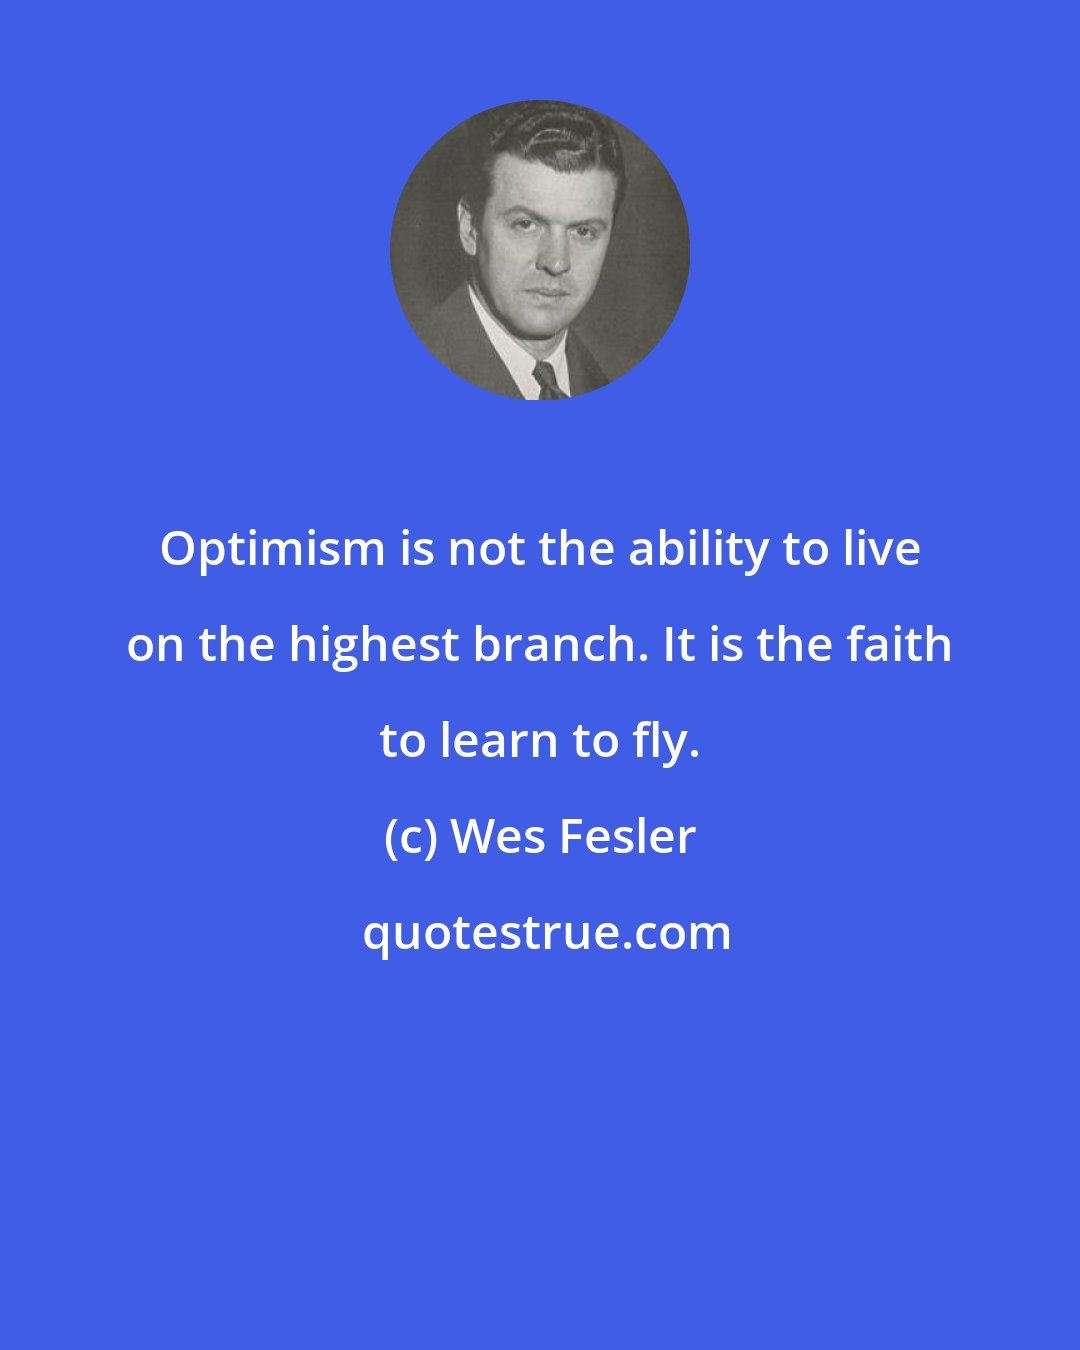 Wes Fesler: Optimism is not the ability to live on the highest branch. It is the faith to learn to fly.